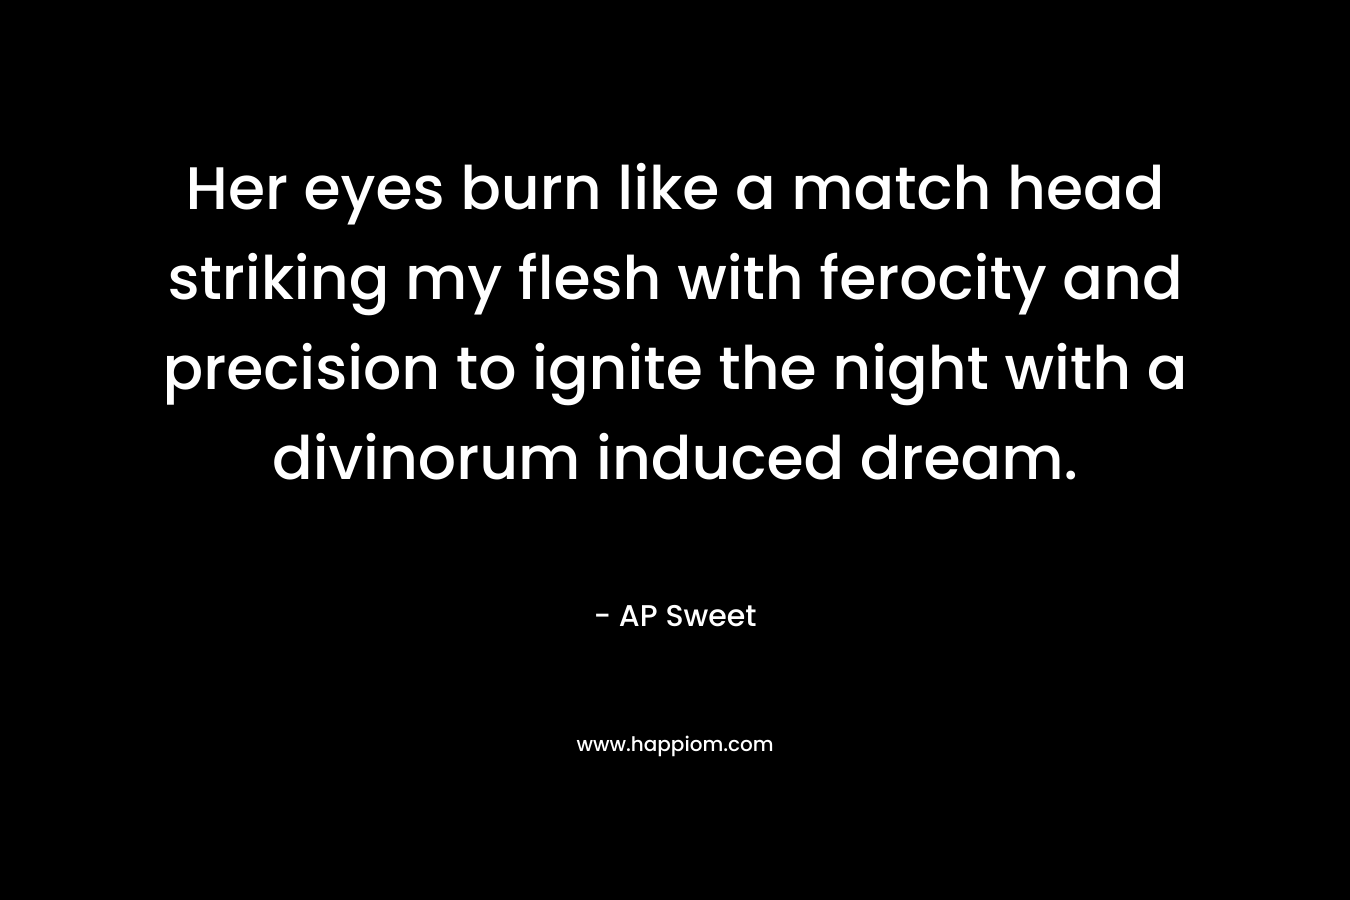 Her eyes burn like a match head striking my flesh with ferocity and precision to ignite the night with a divinorum induced dream. – AP Sweet